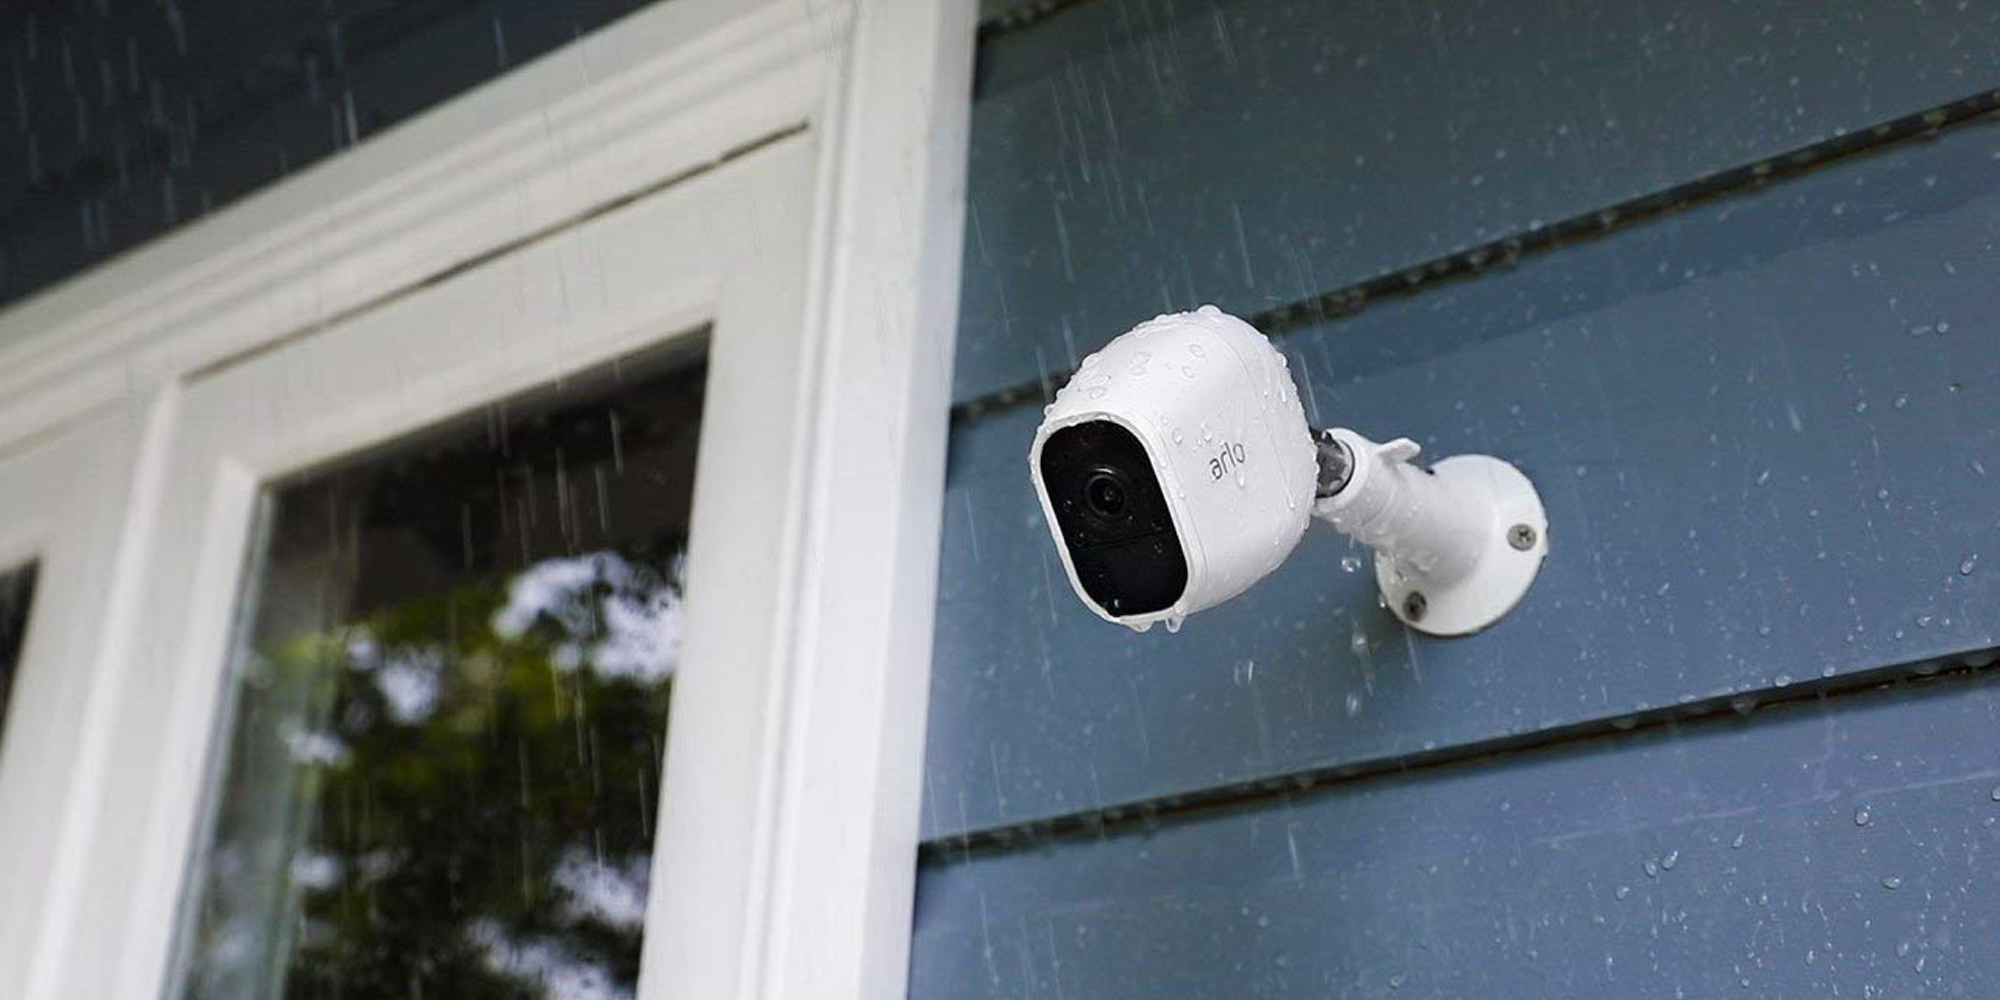 How Does My Home Security Work in a Power Outage?